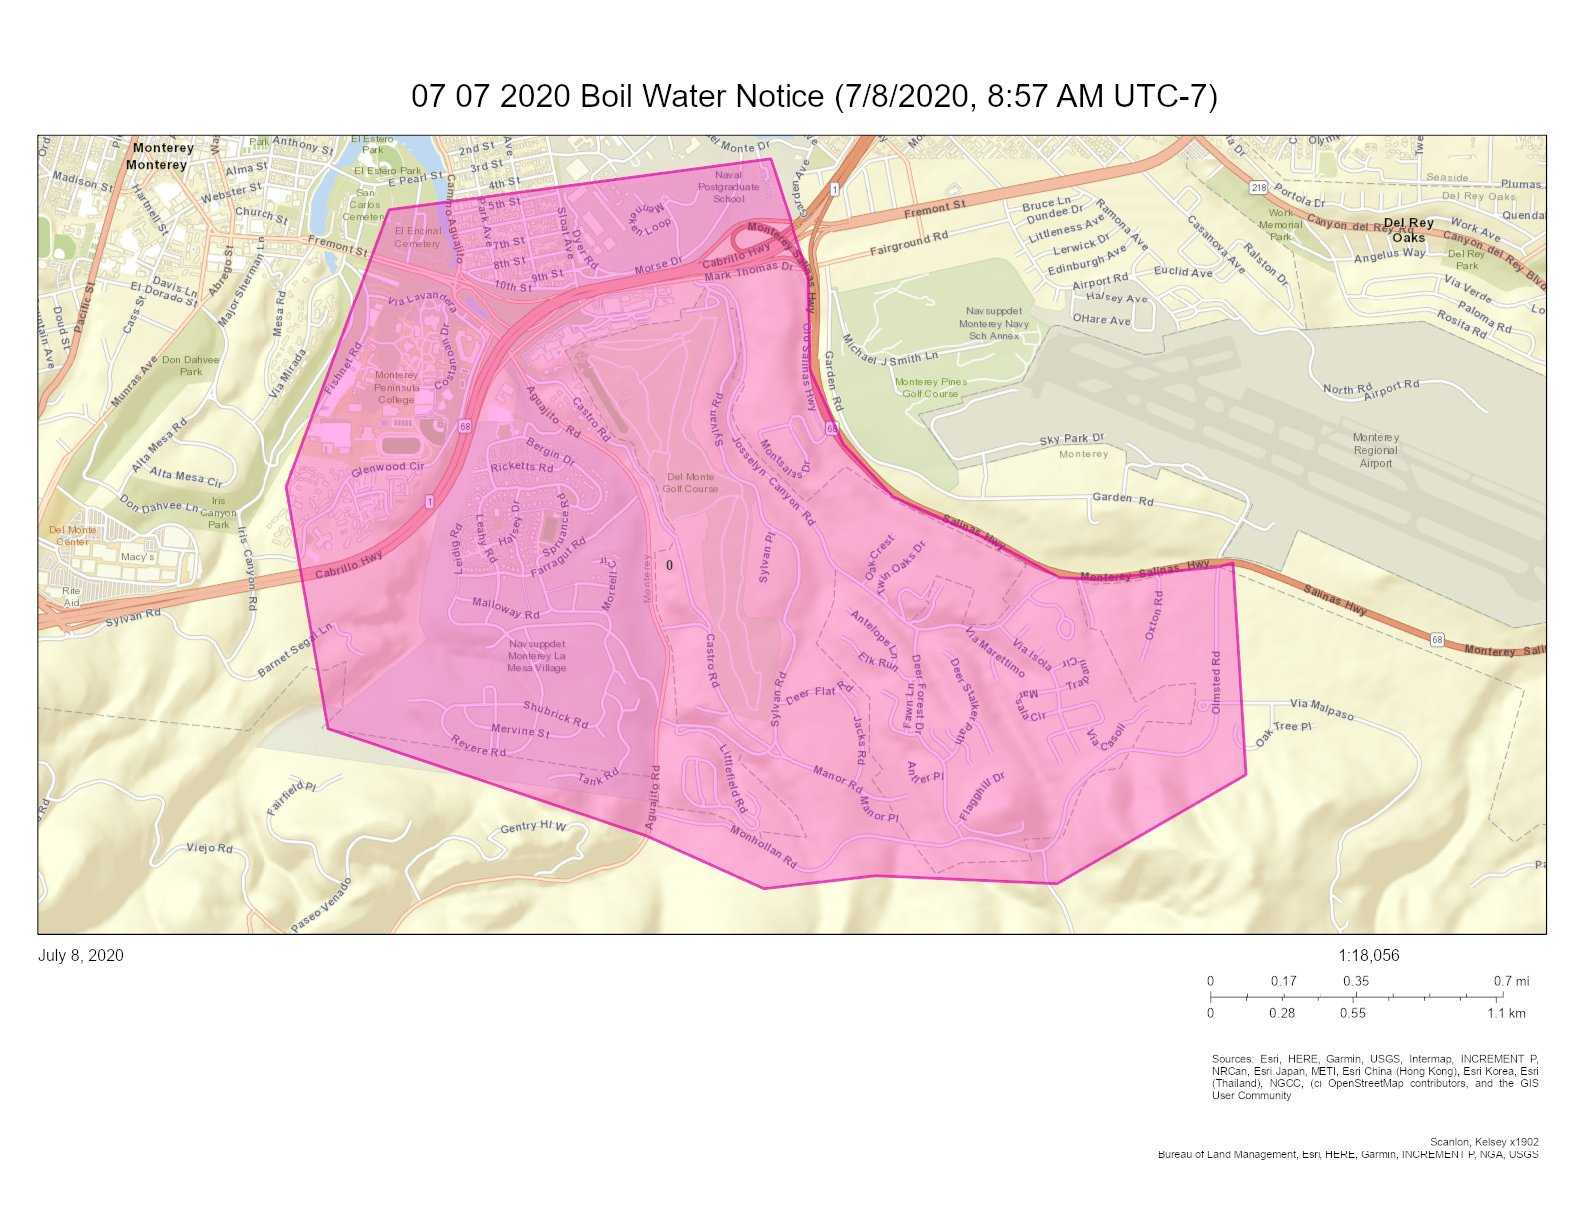 Boil Water Notice Issued For Del Monte Area Of Monterey